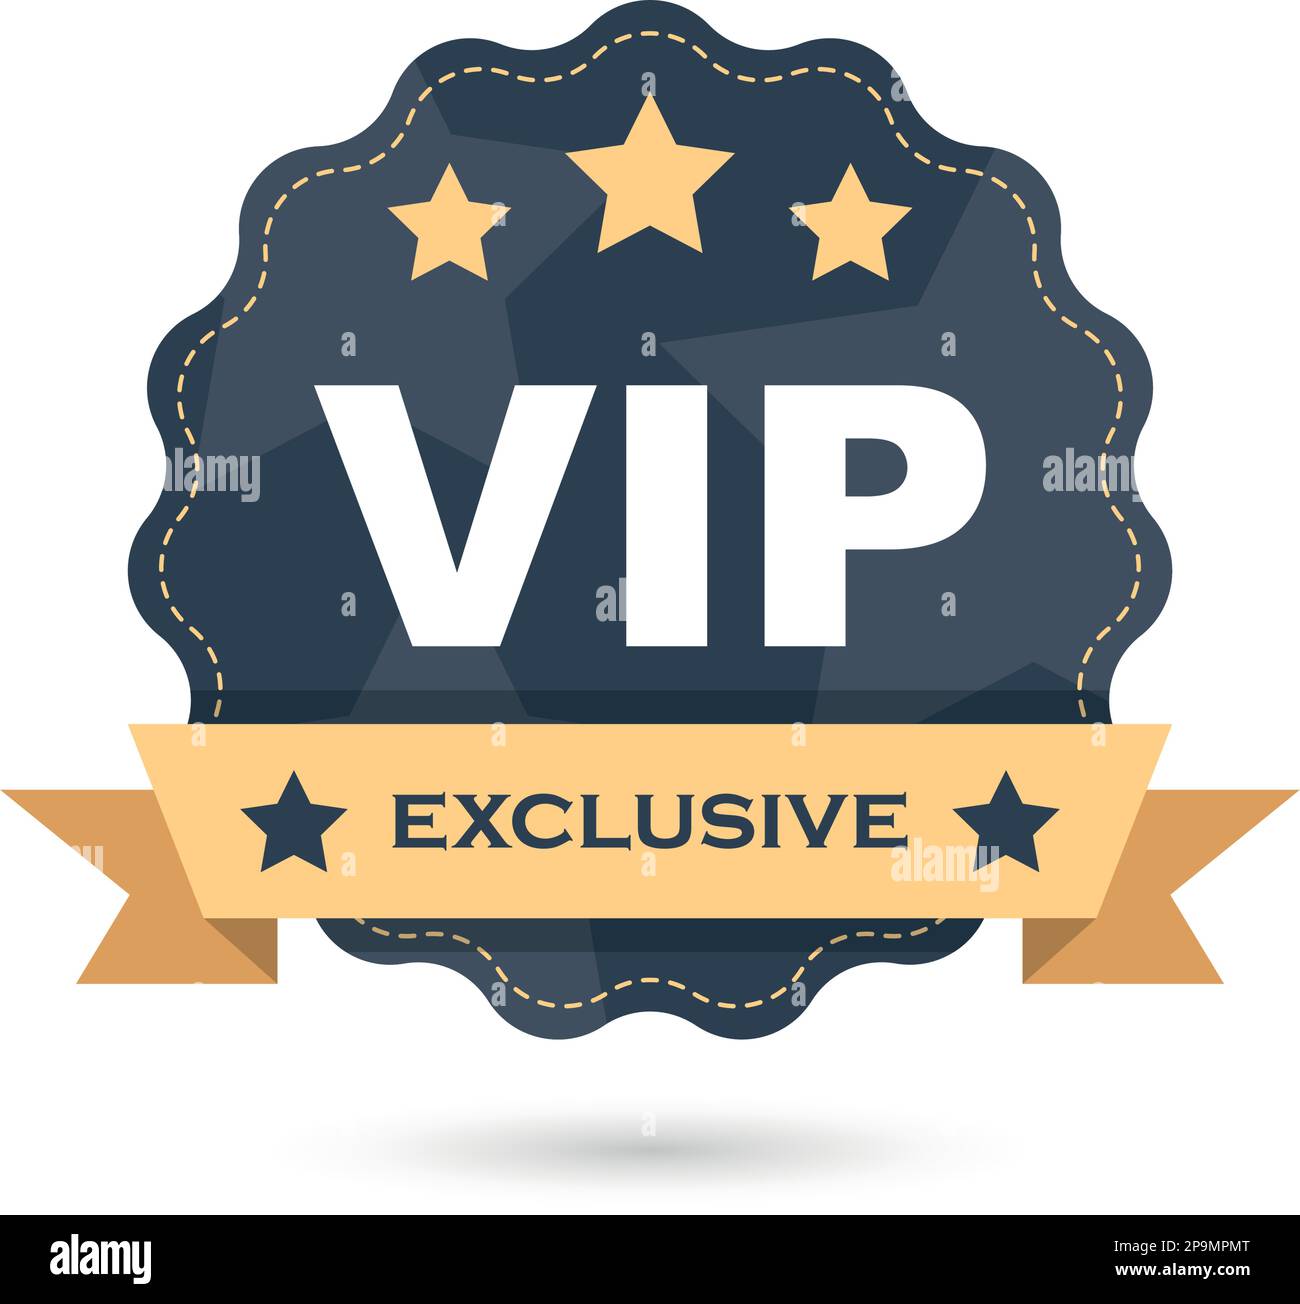 VIP badges icon in flat style. Exclusive badge vector illustration on isolated background. Premium luxury sign business concept. Stock Vector